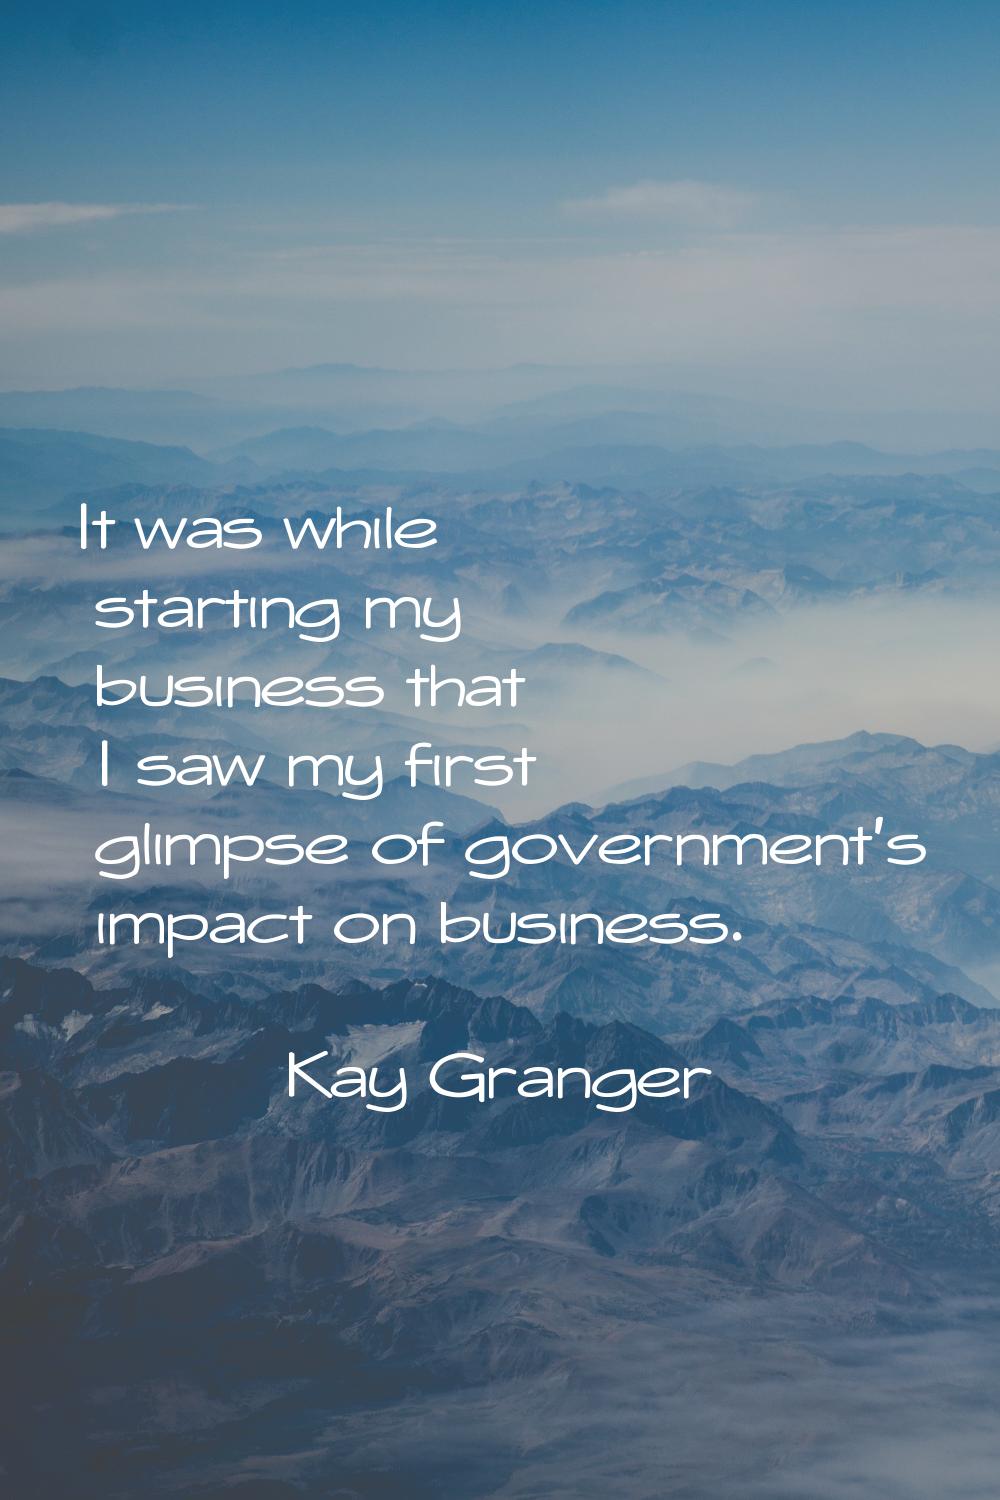 It was while starting my business that I saw my first glimpse of government's impact on business.